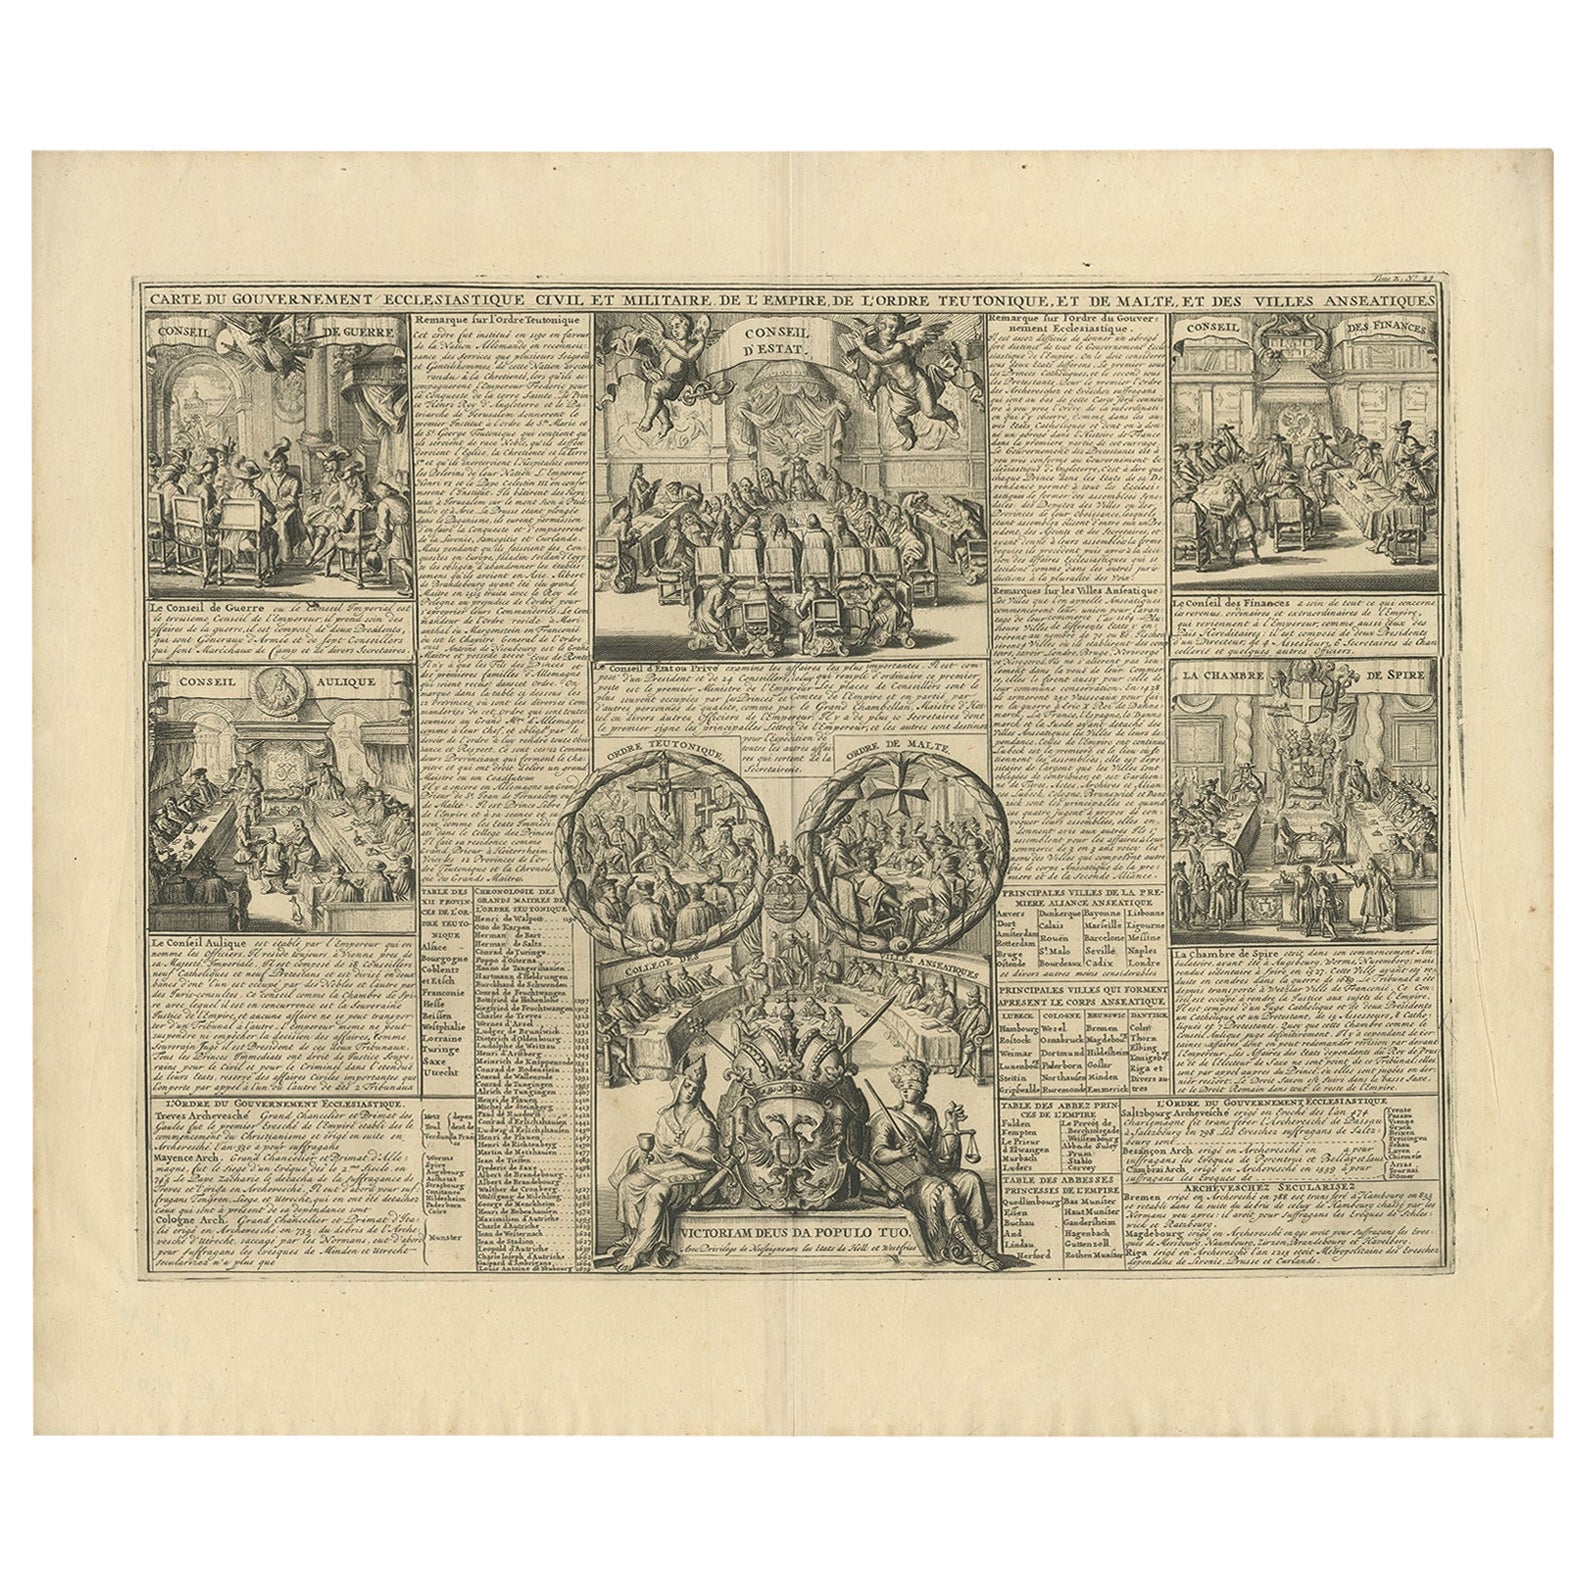 Print of the Hanseatic League with the Orders of Malta and the Tuetonic Order